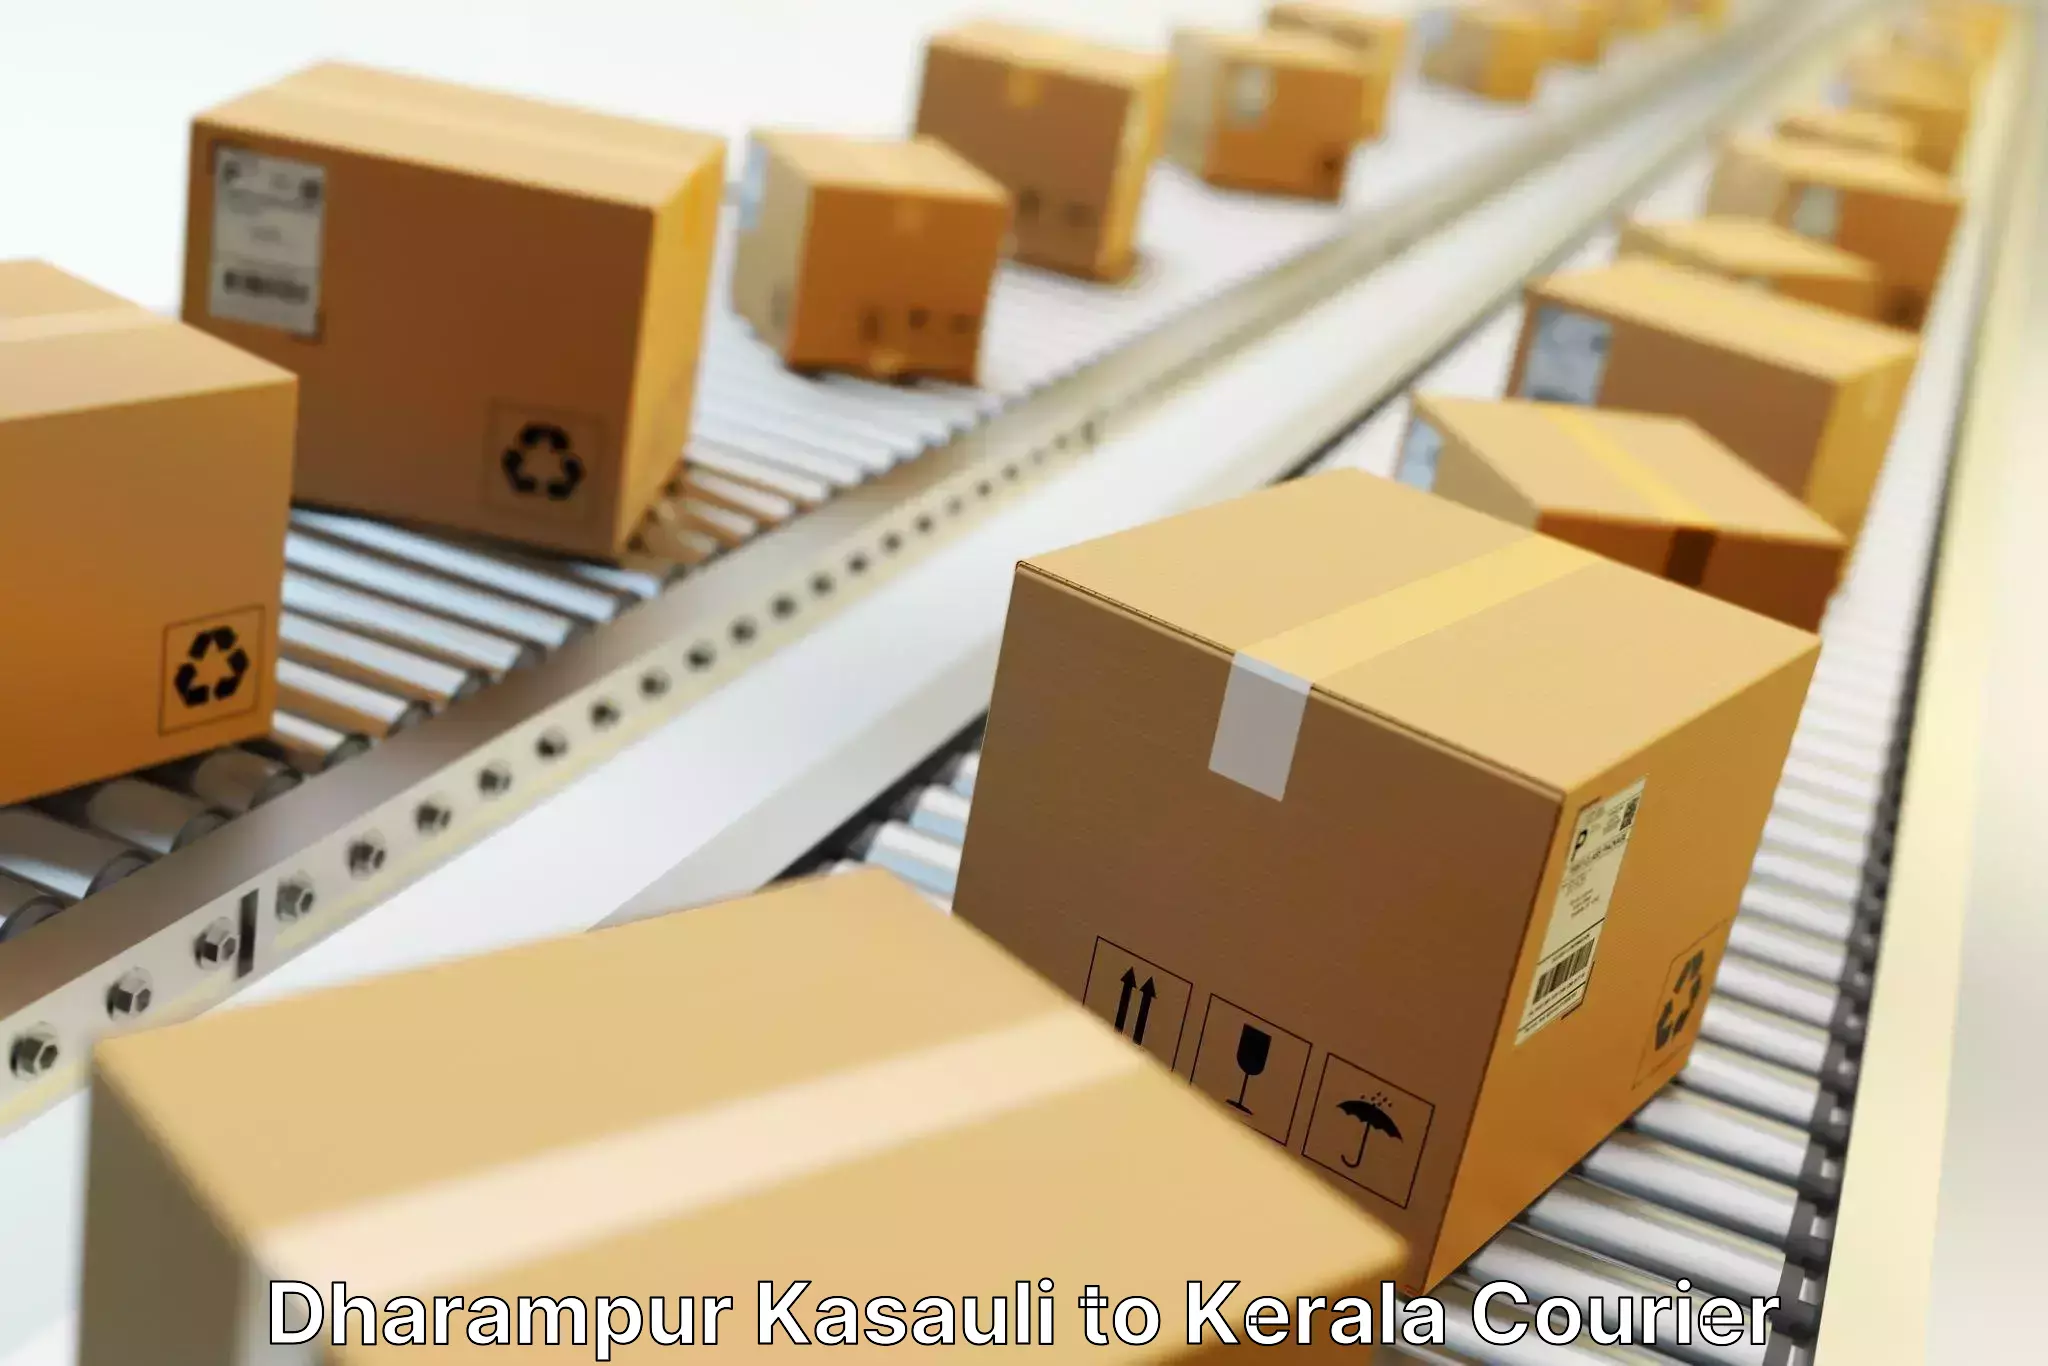 Package delivery network Dharampur Kasauli to Trivandrum